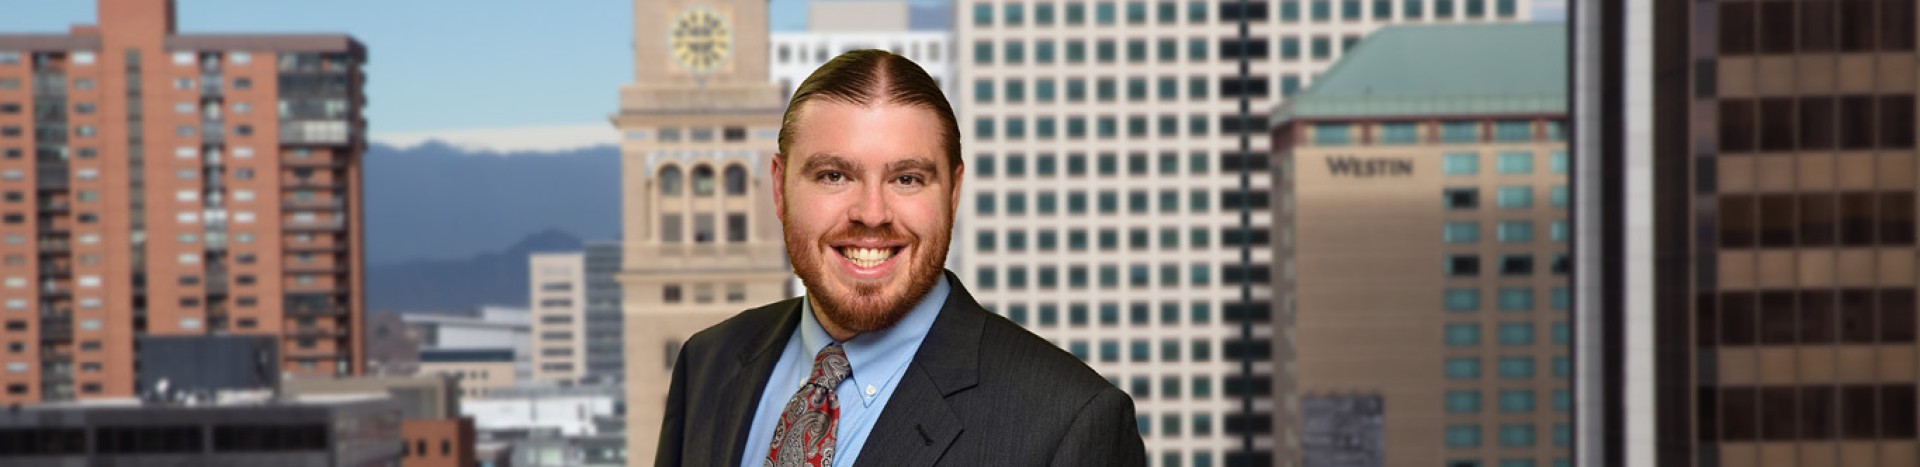 Kirk McGill is a Denver attorney with Hall Estill who specializes in litigation and regulatory matters around the state of Colorado.

